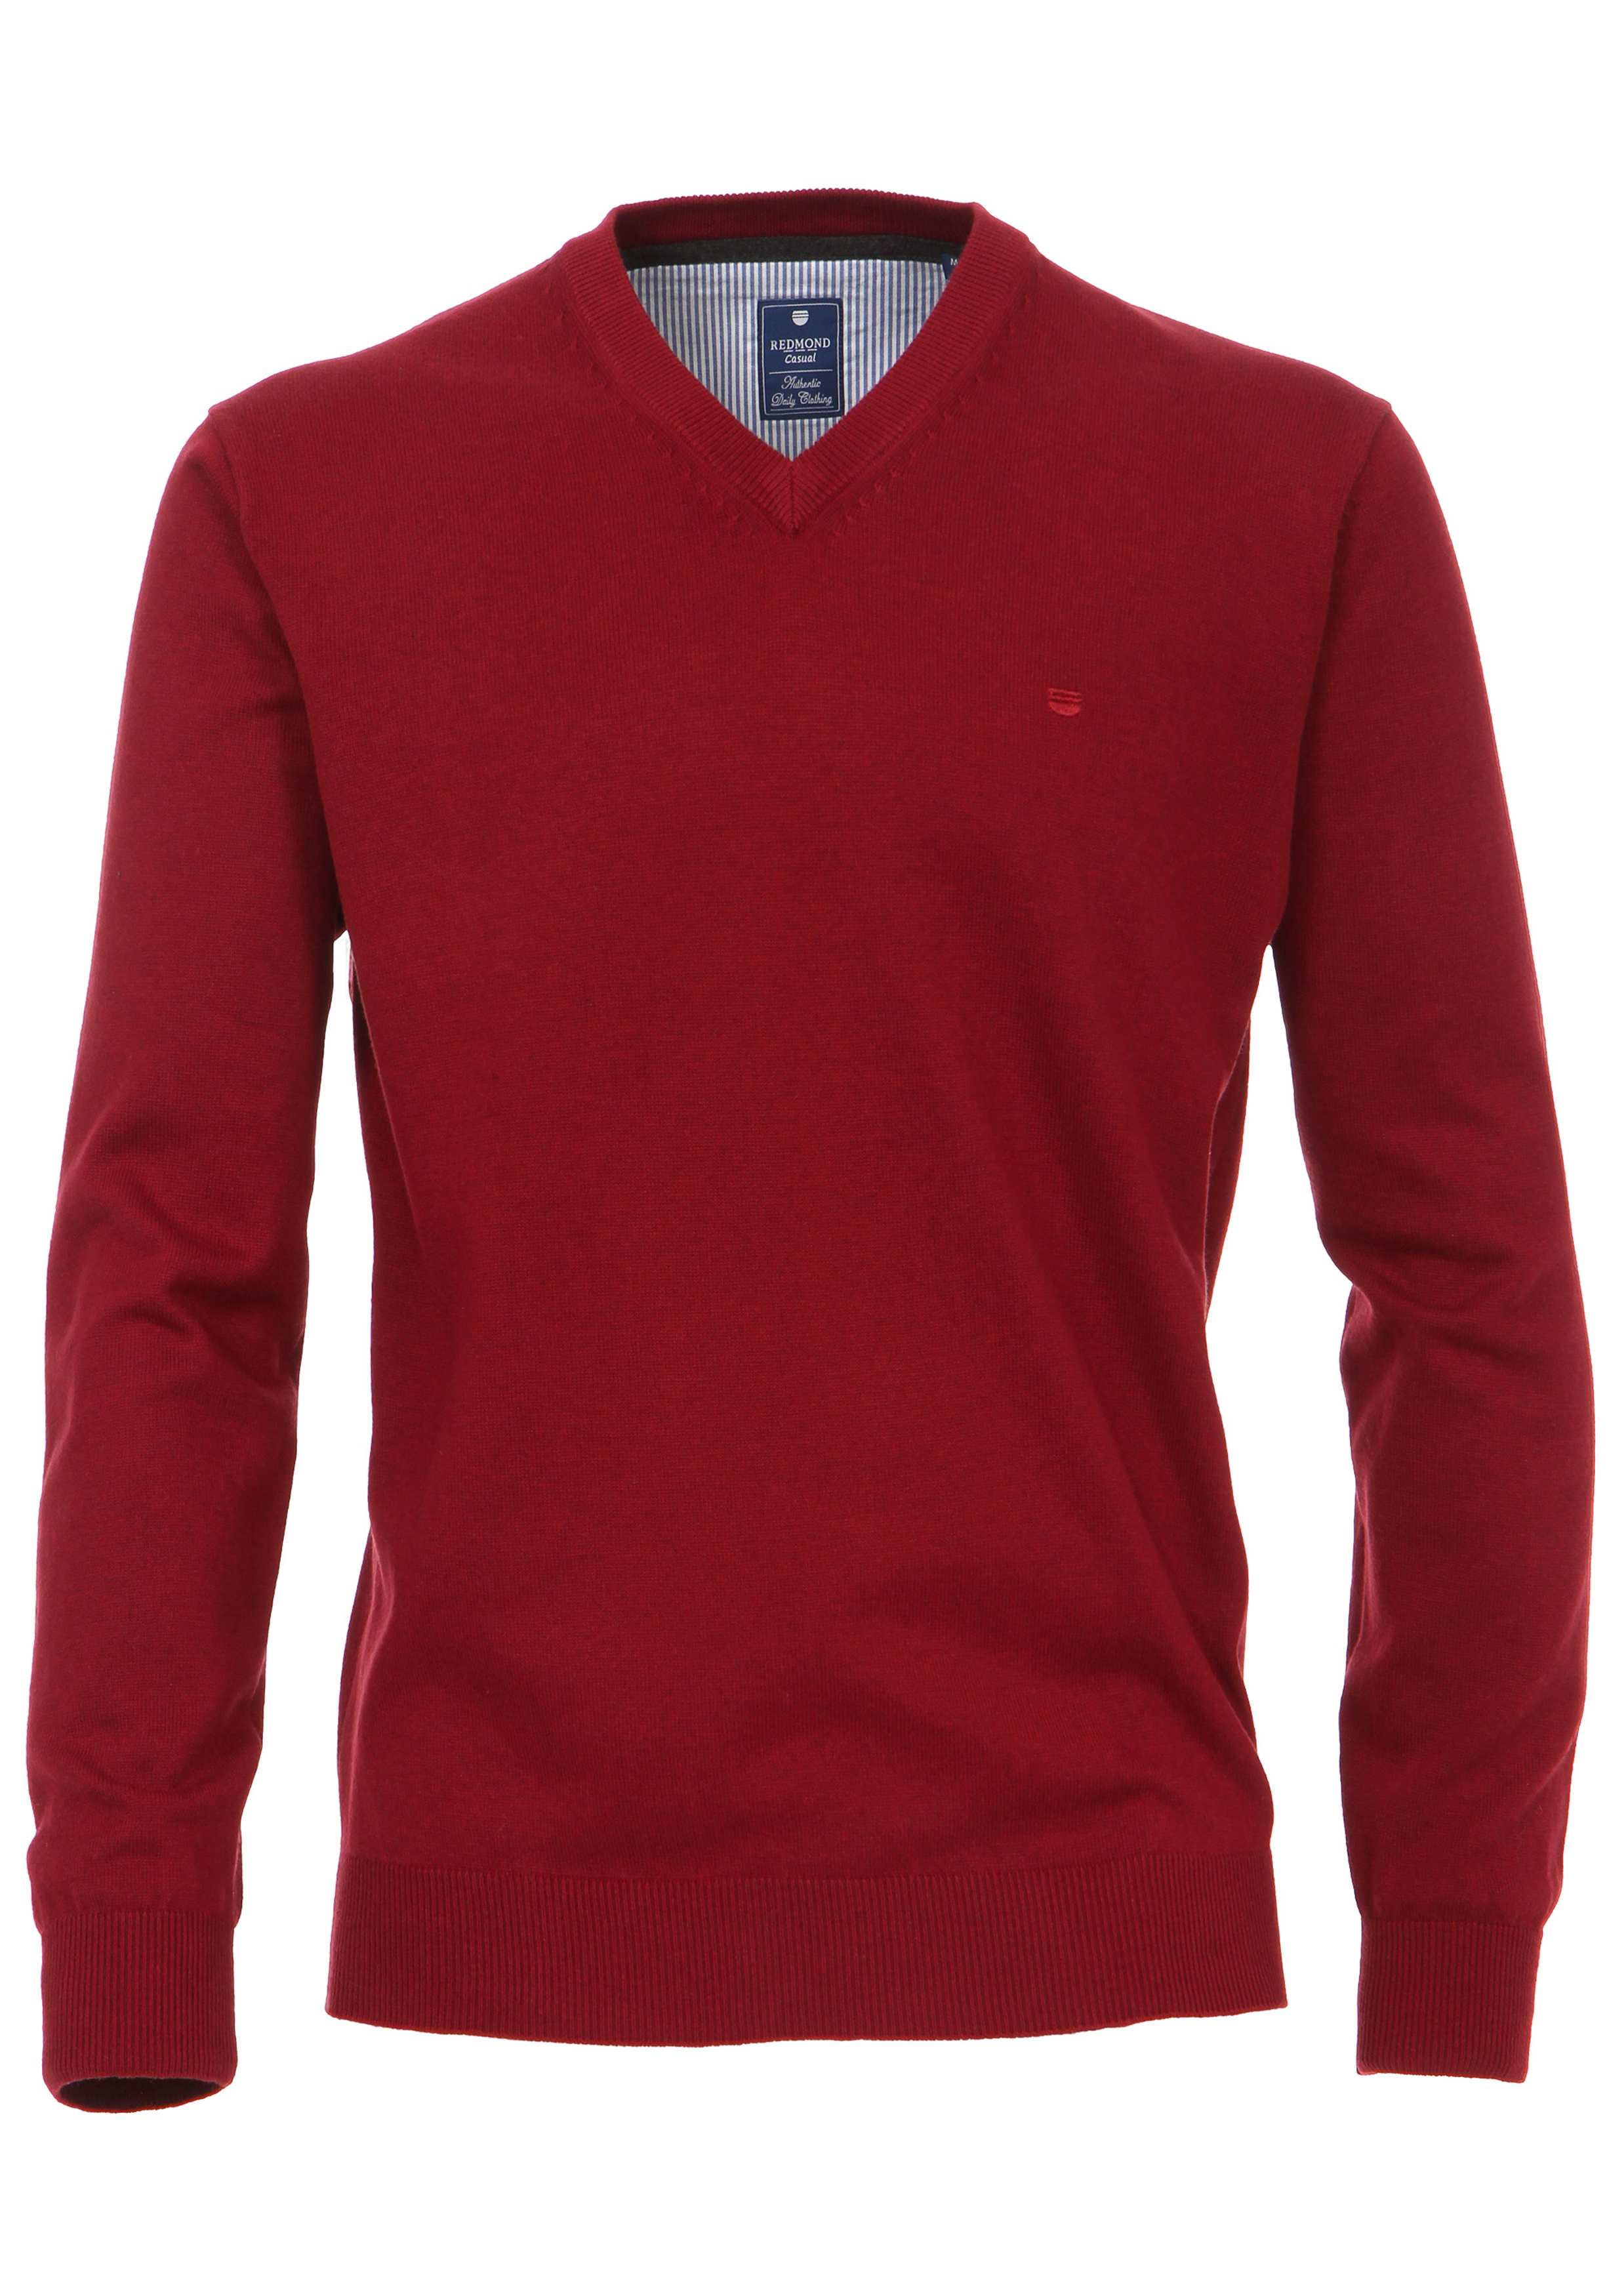 Marco Polo Kabeltrui rood casual uitstraling Mode Sweaters Kabeltruien 